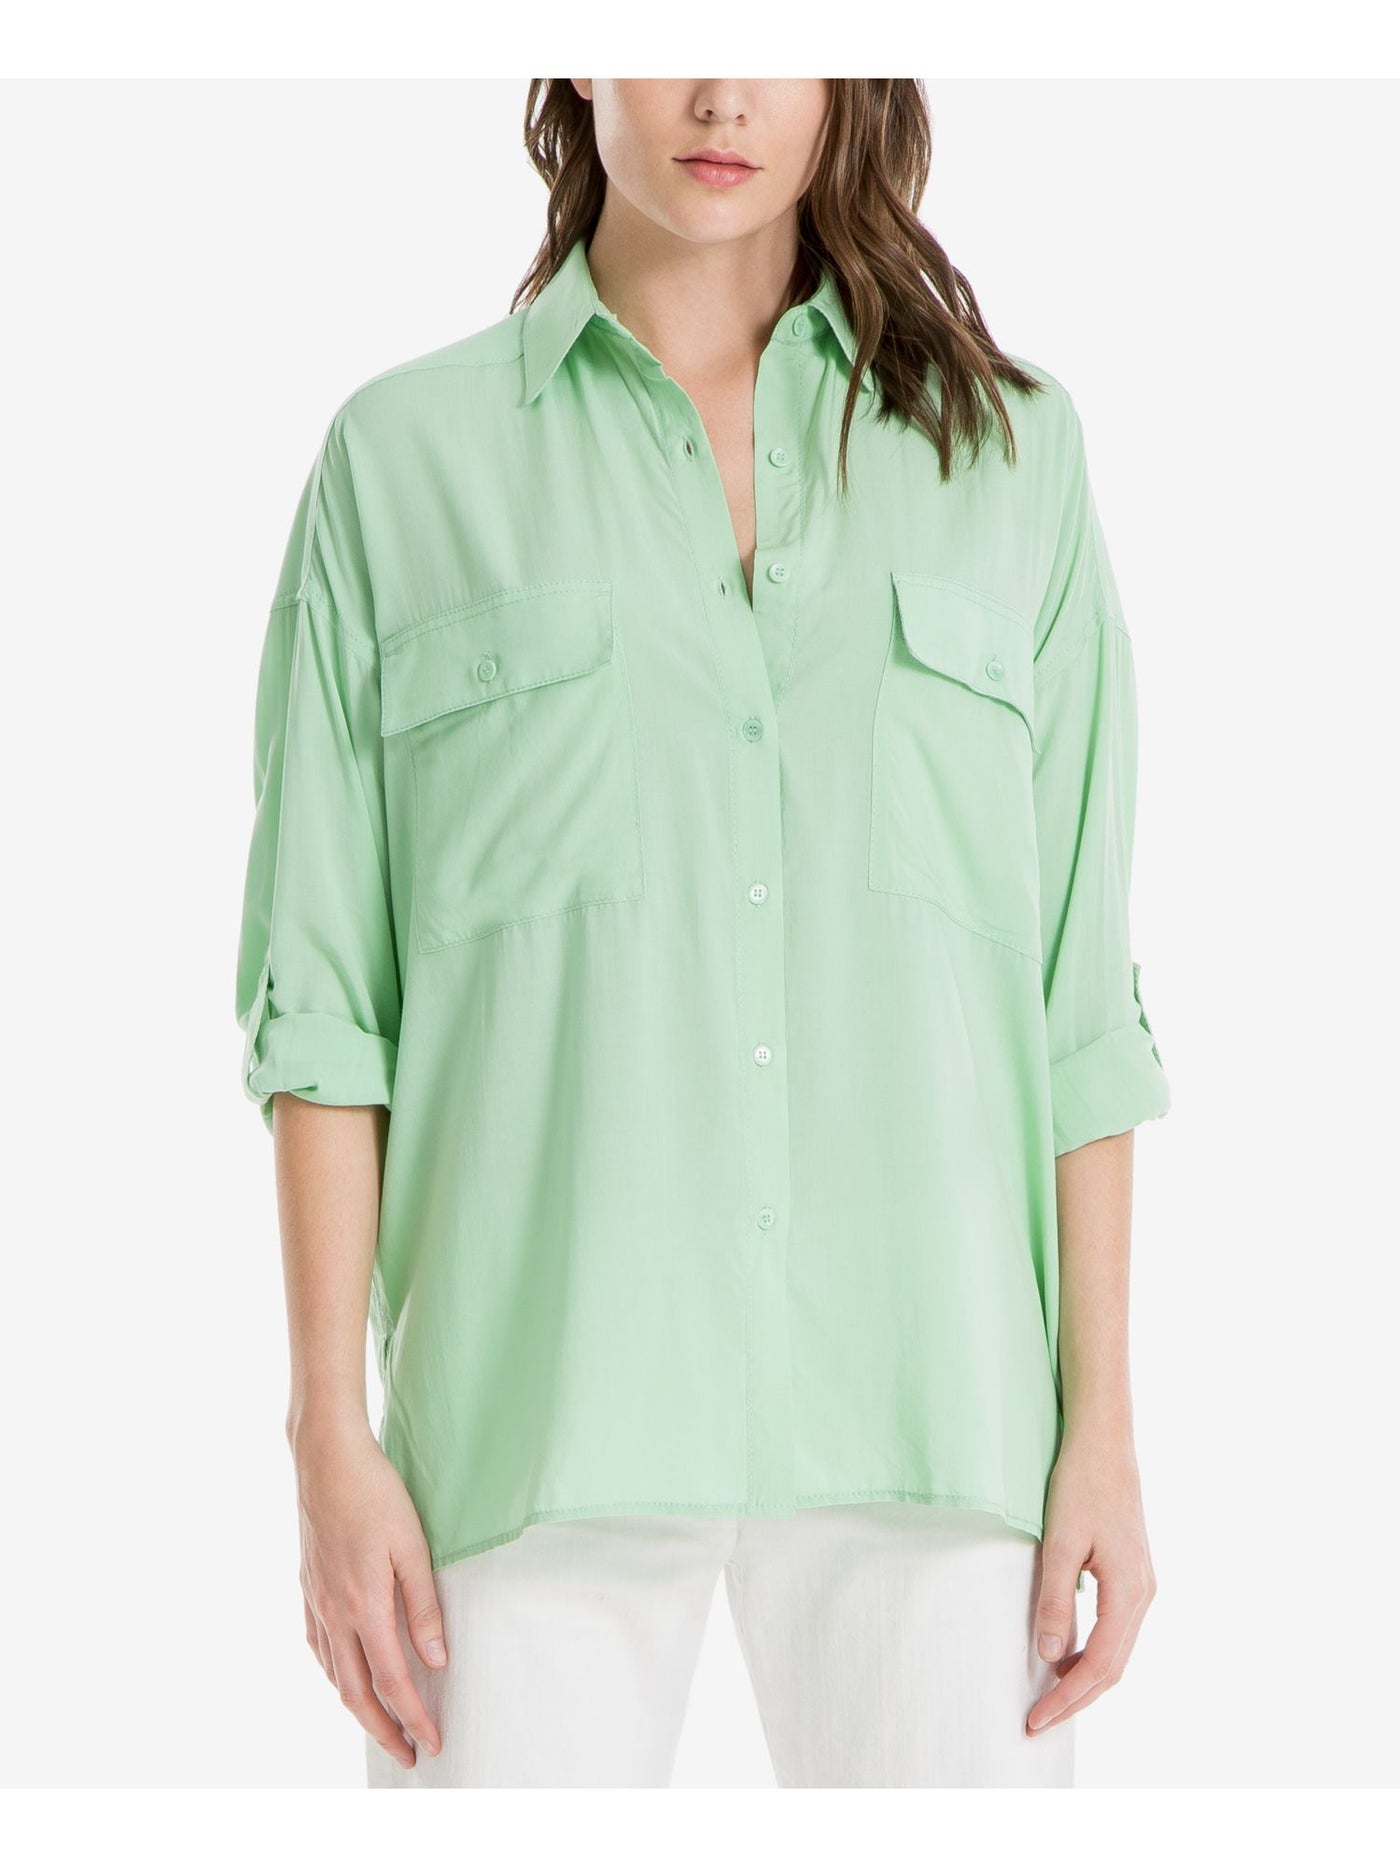 MAX STUDIO Womens Green Pocketed Cuffed Collared Button Up Top Size: XS\S